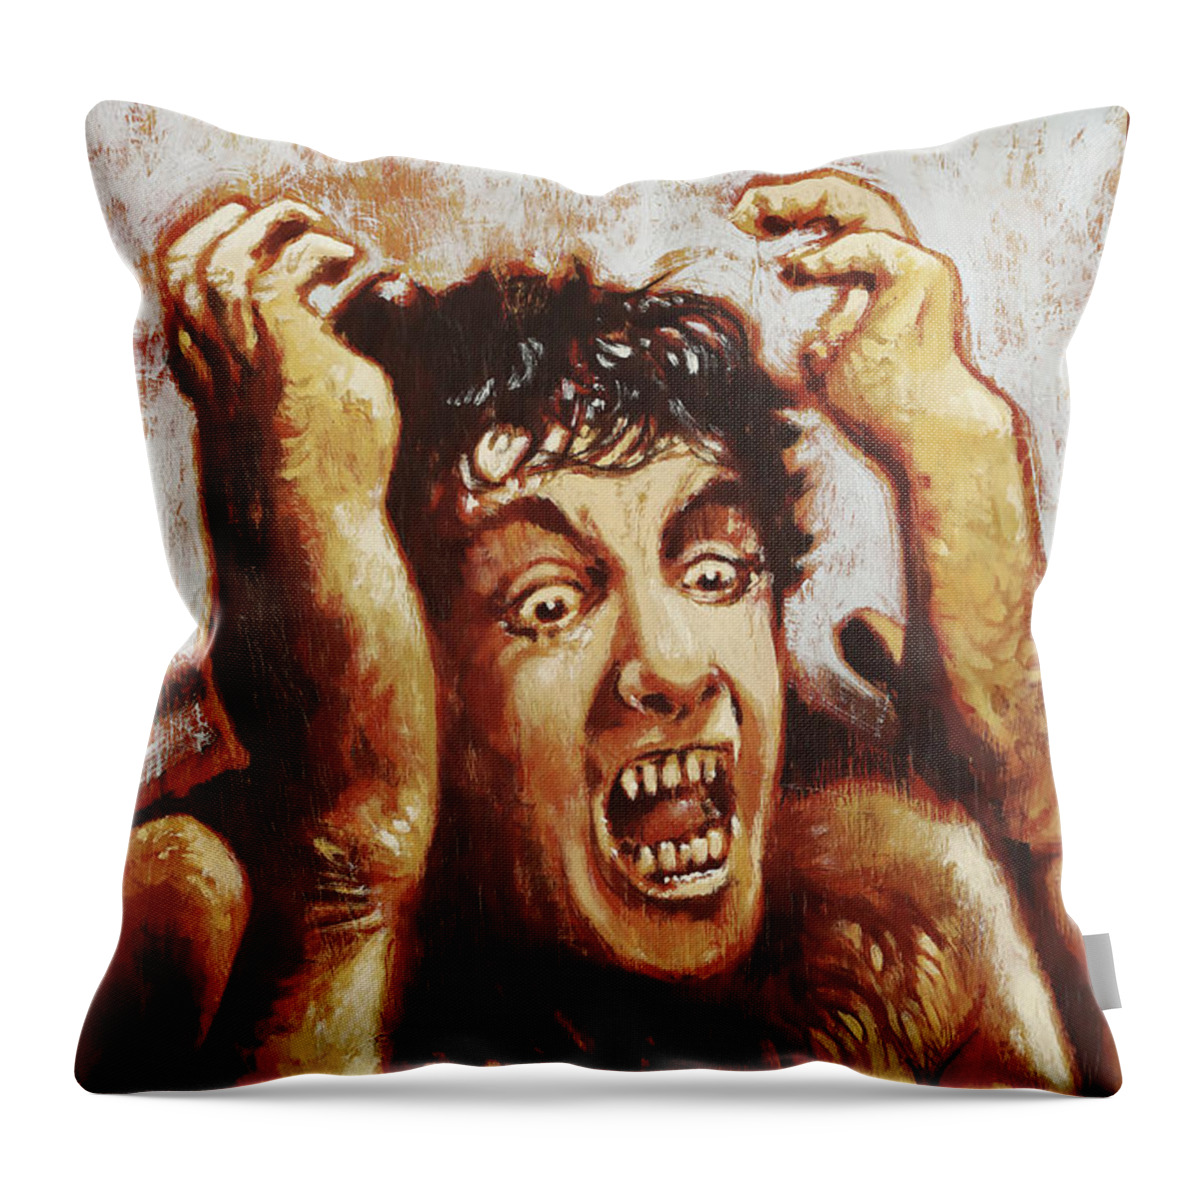 Werewolf Throw Pillow featuring the painting An American Werewolf in London - David Naughton by Sv Bell